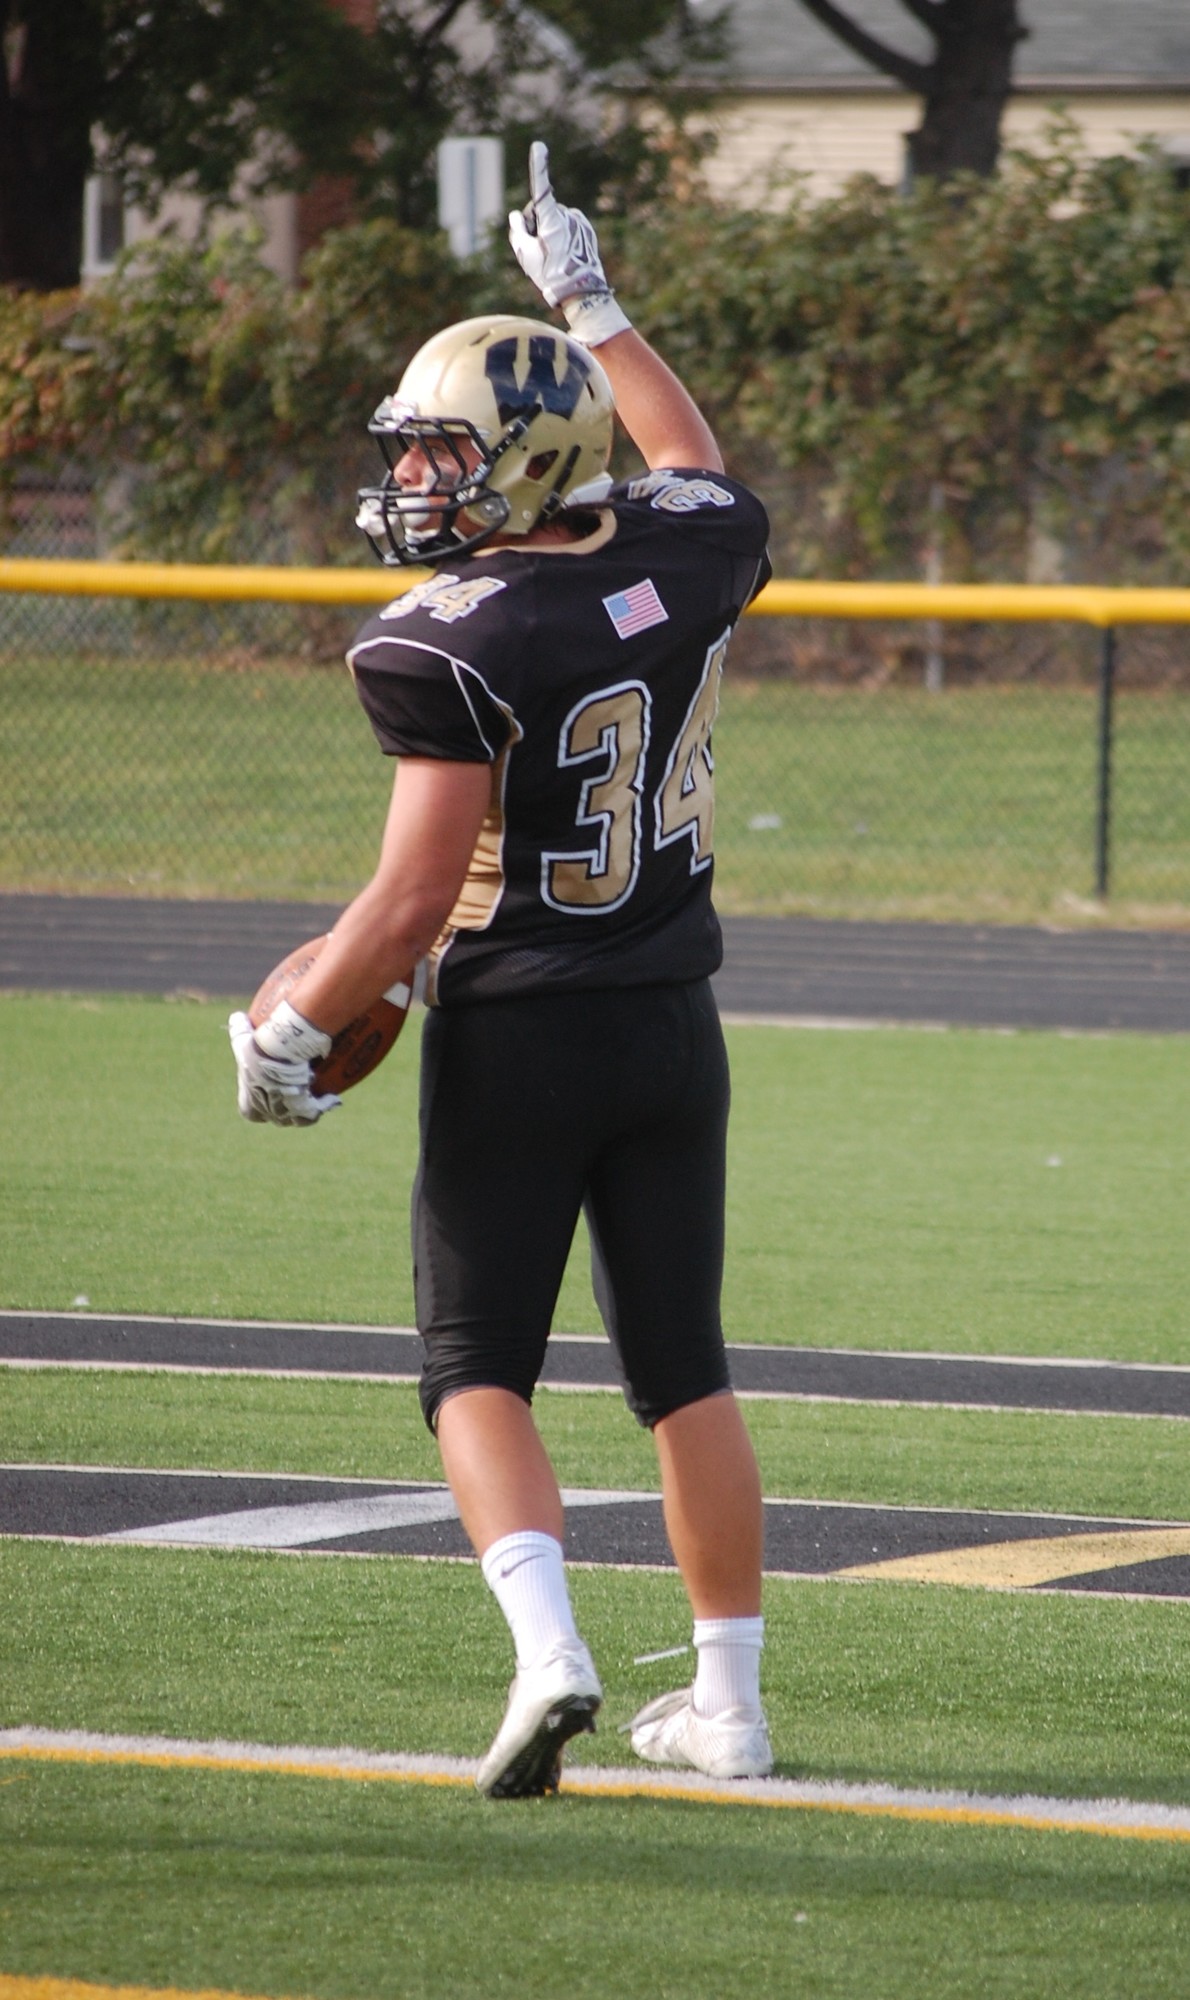 Kyle Sliwak celebrates after scoring a touchdown in the Warriors 27-0 win.